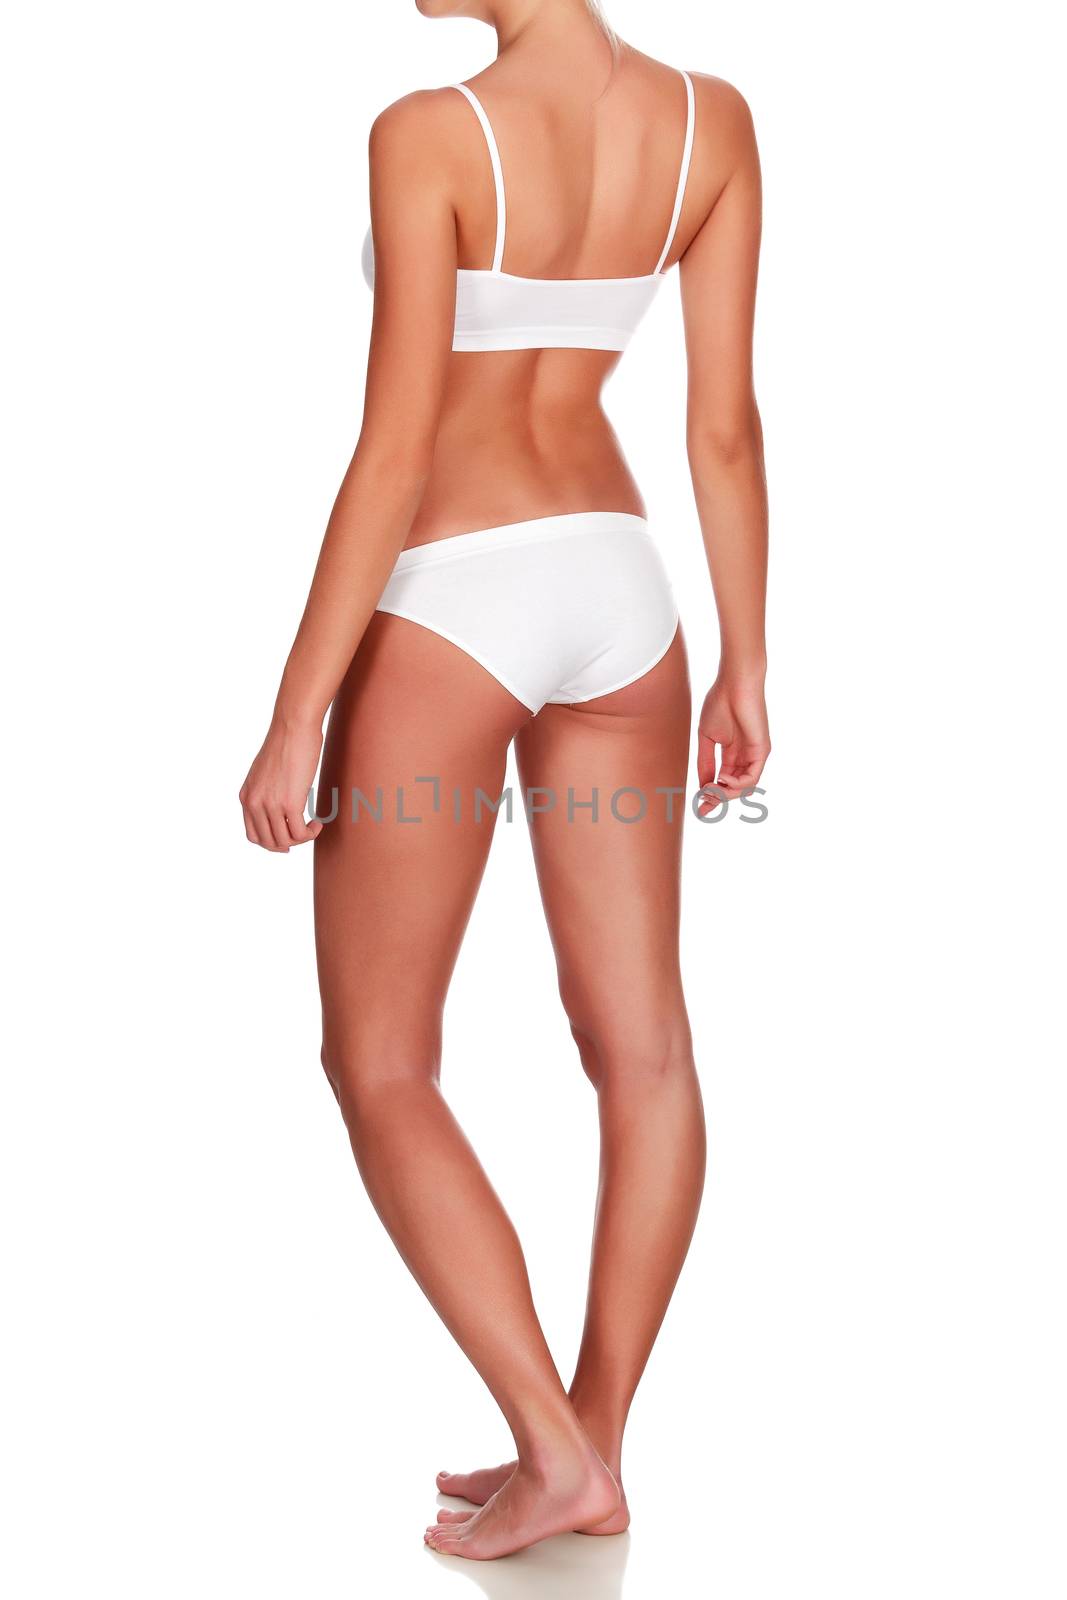 Slim woman body on white background by Nobilior